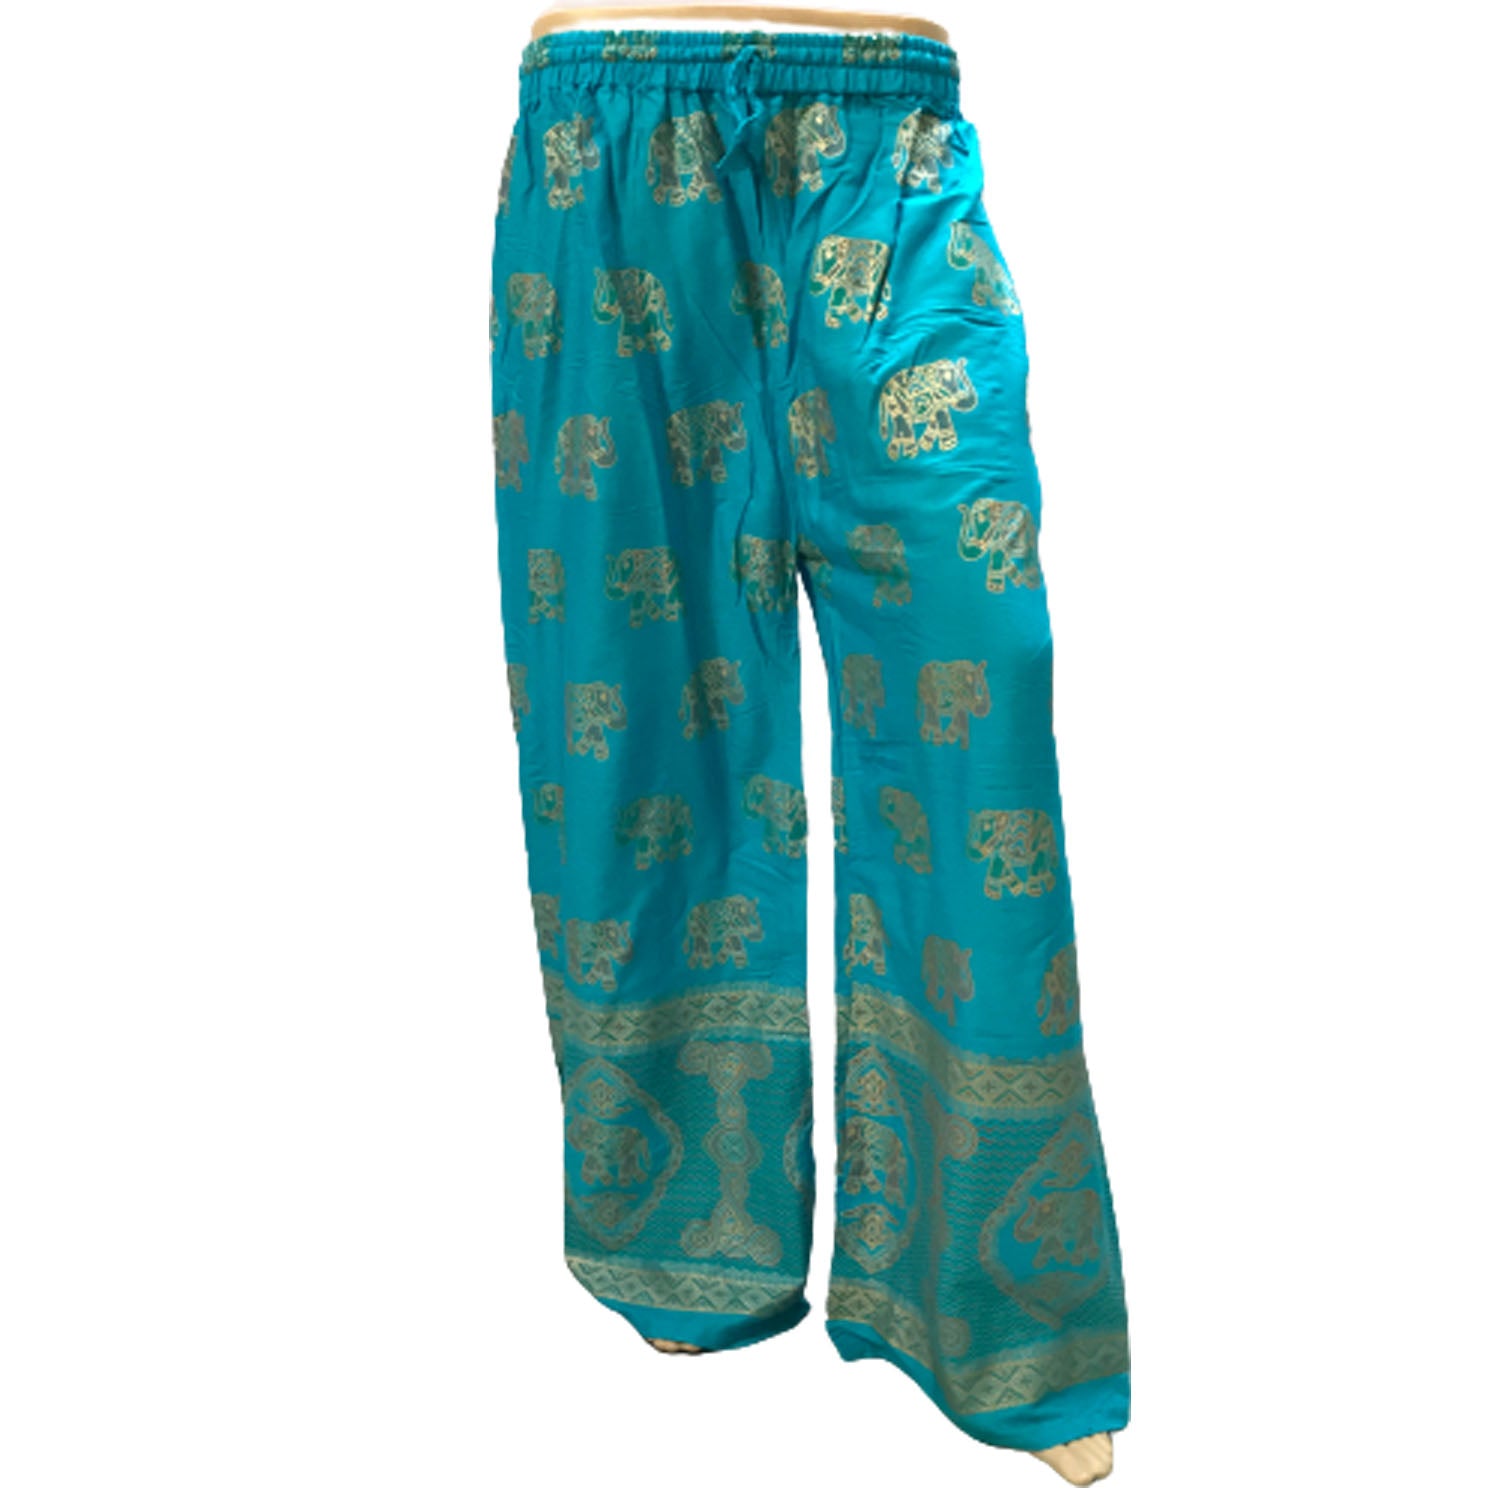 Ganesha Handicrafts Indian Style Elephant Print Solid Colour Loose Trousers, Trousers, loose Trousers, Colour Trousers, Print Trousers, Elephant Print Trousers, Indian Style Trousers, Indian Style Print Trousers, Blue Trousers